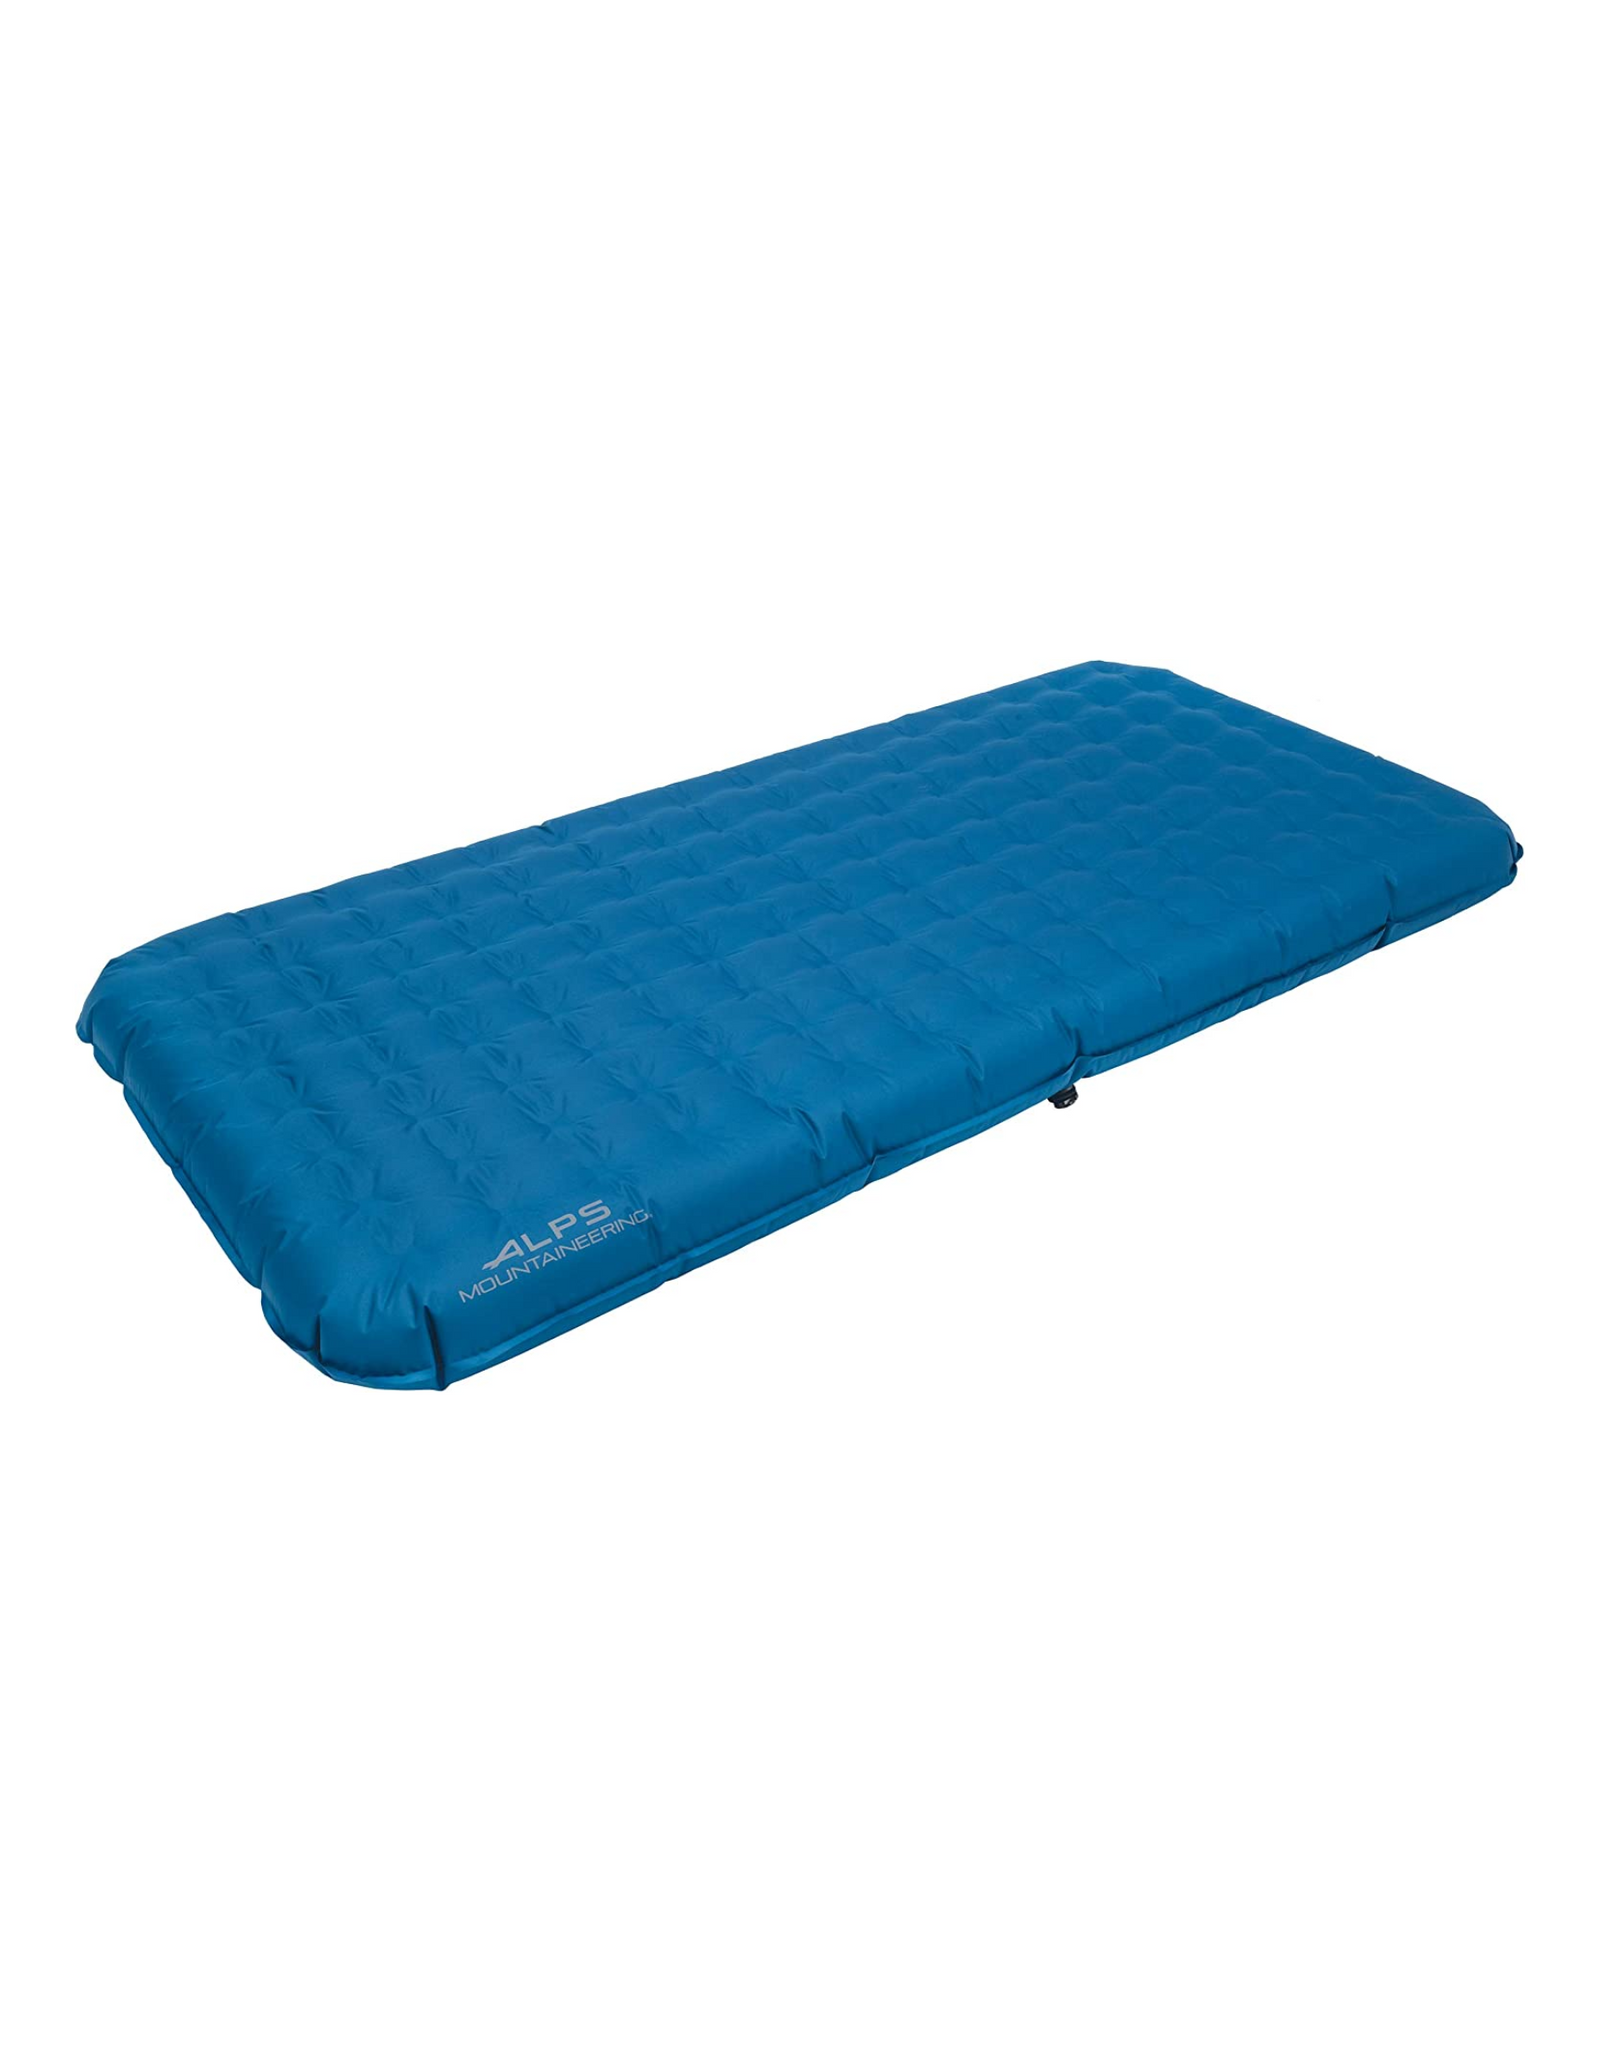 ALPS Mountaineering Vertex Air Bed, Twin Size